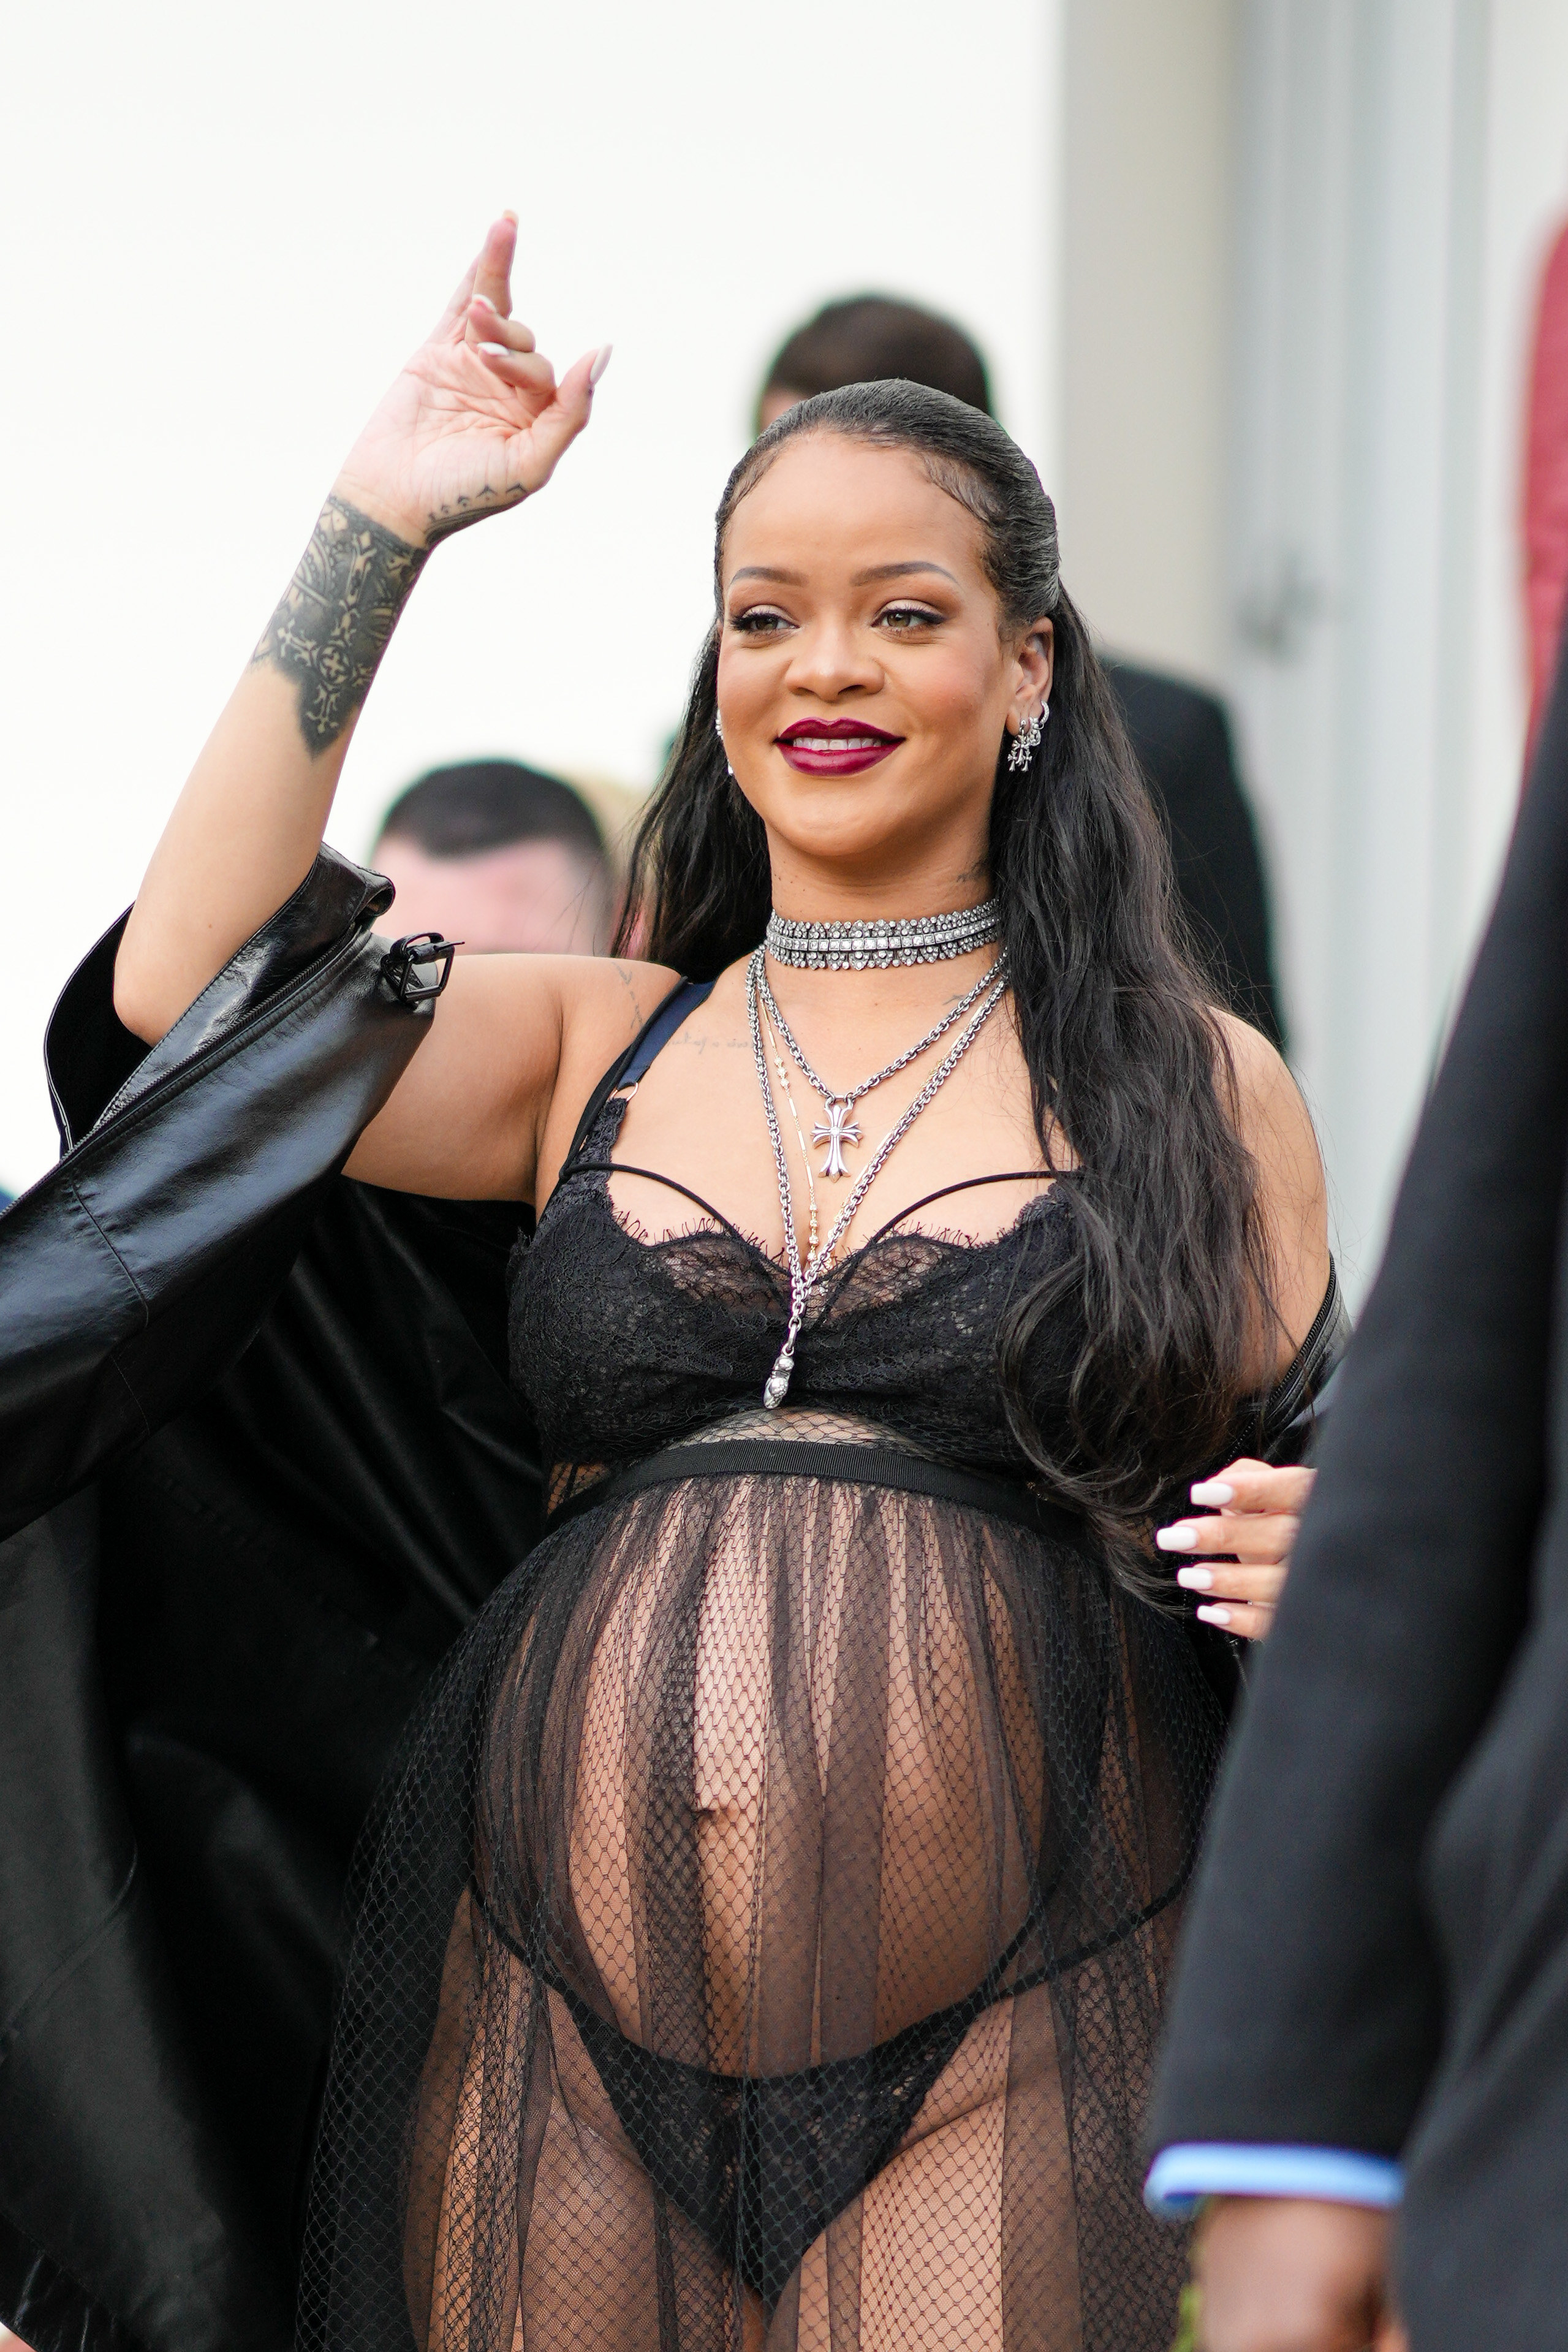 Rihanna waving at the Dior show while wearing see-through lingerie that shows off her baby bump